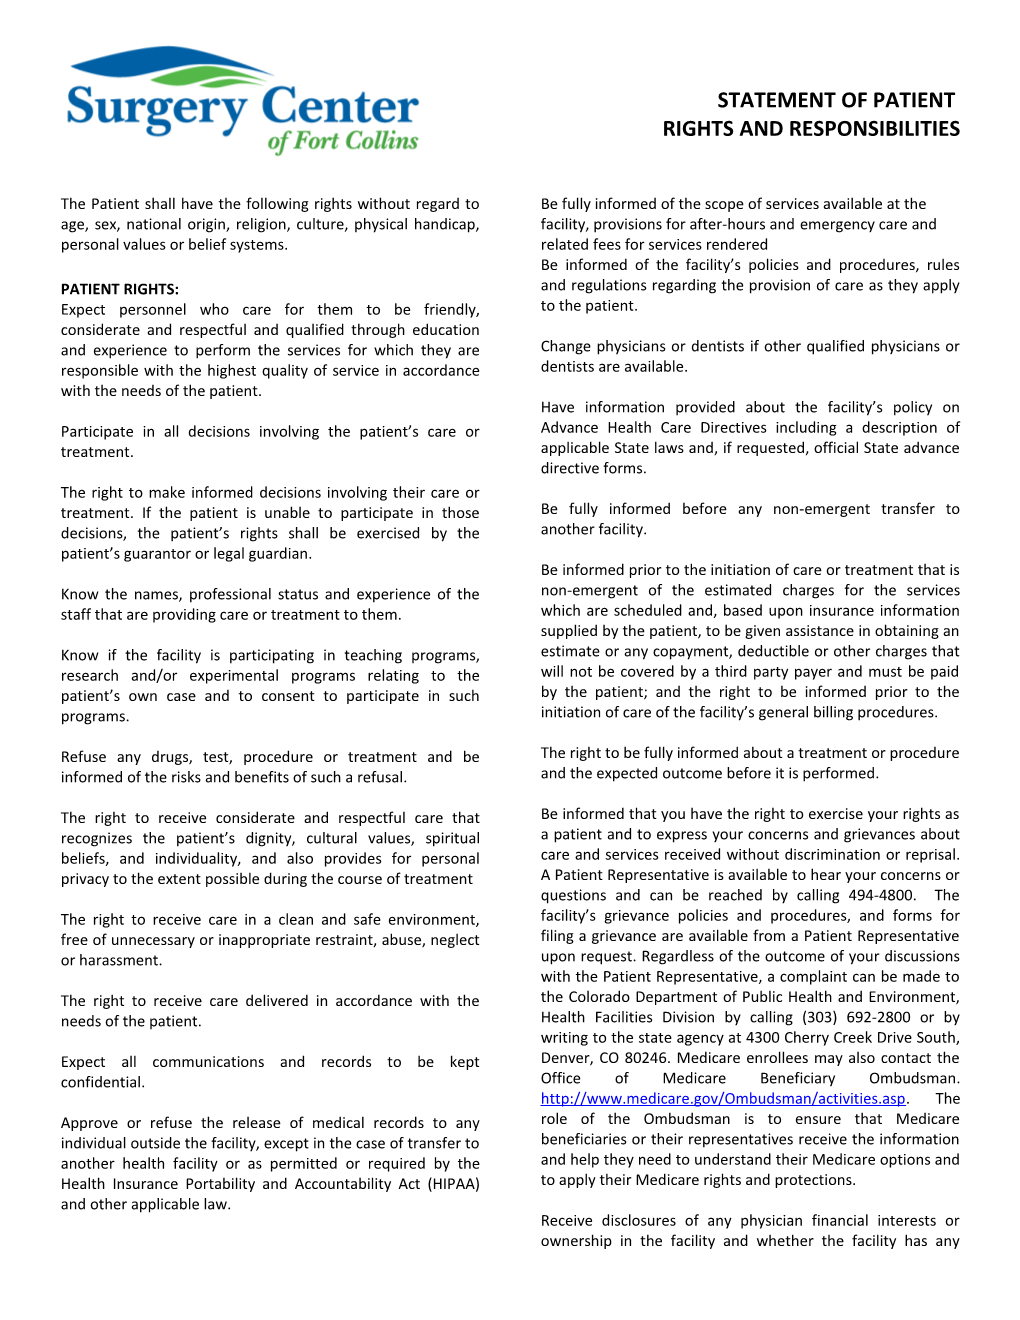 Statement of Patient Rights and Responsibilities